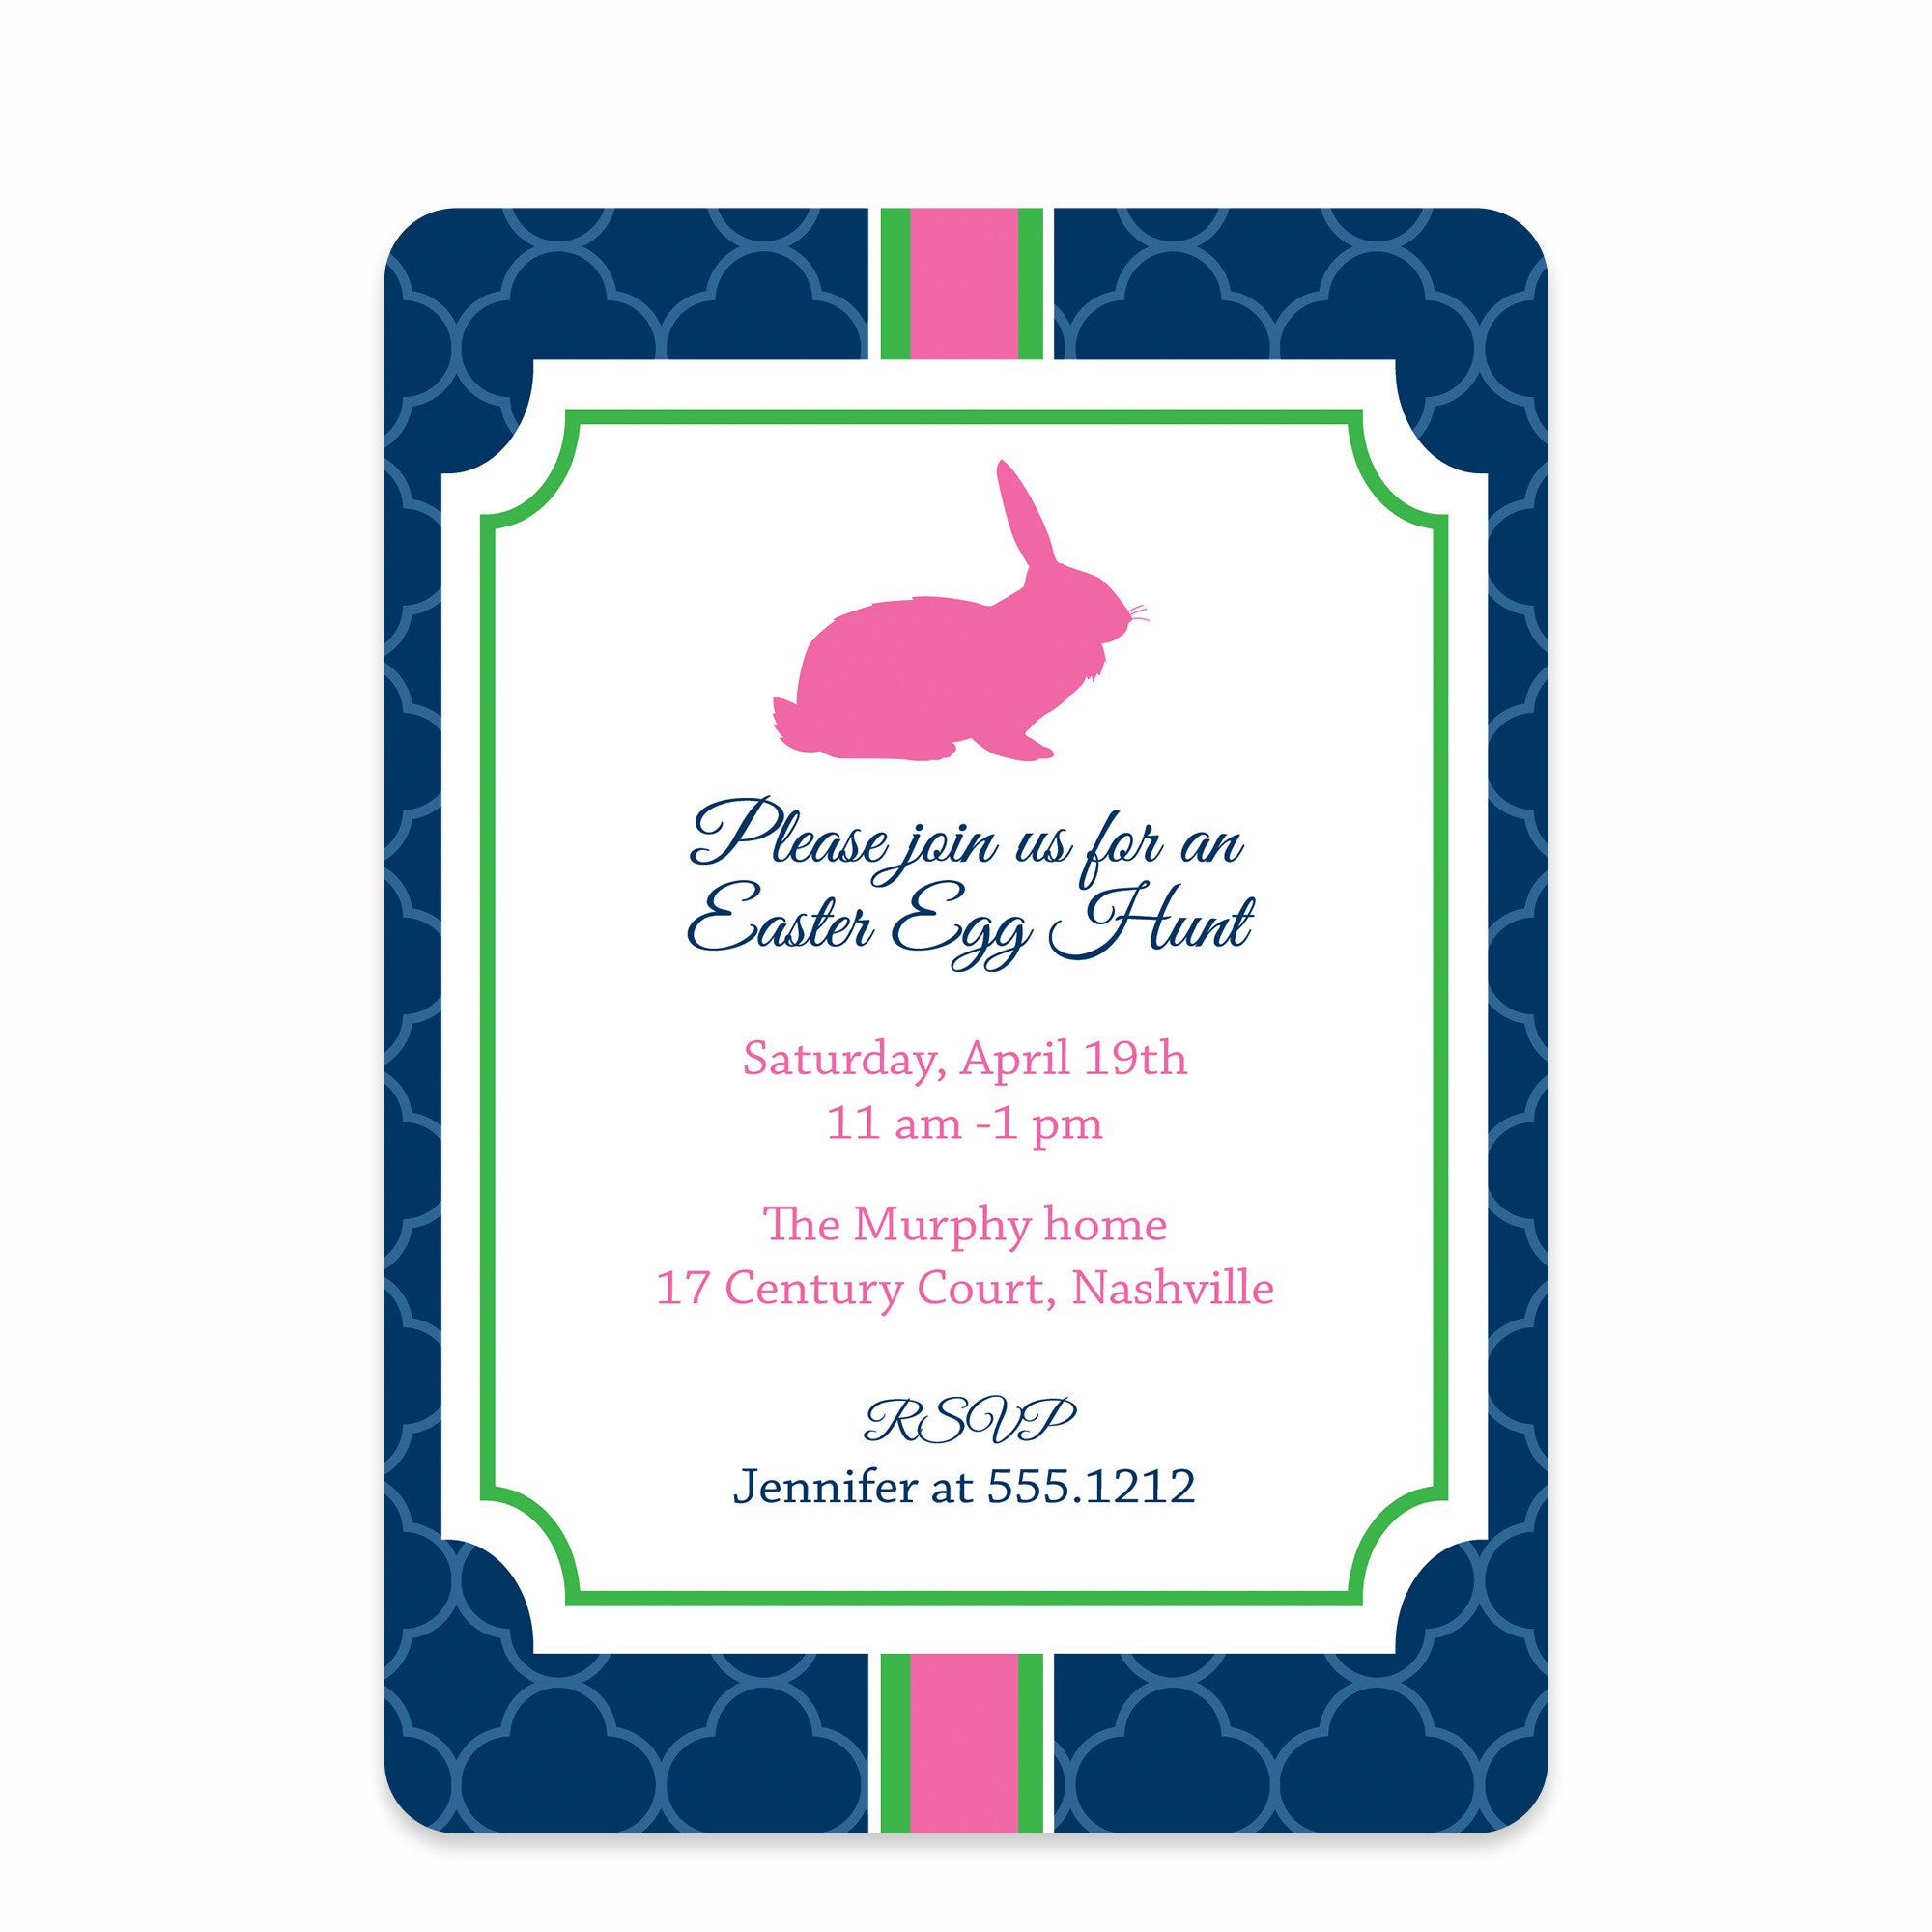 Easter Party Brunch Invitation, Elegant Design printed on heavyweight cardstock, from Pipsy.com, front